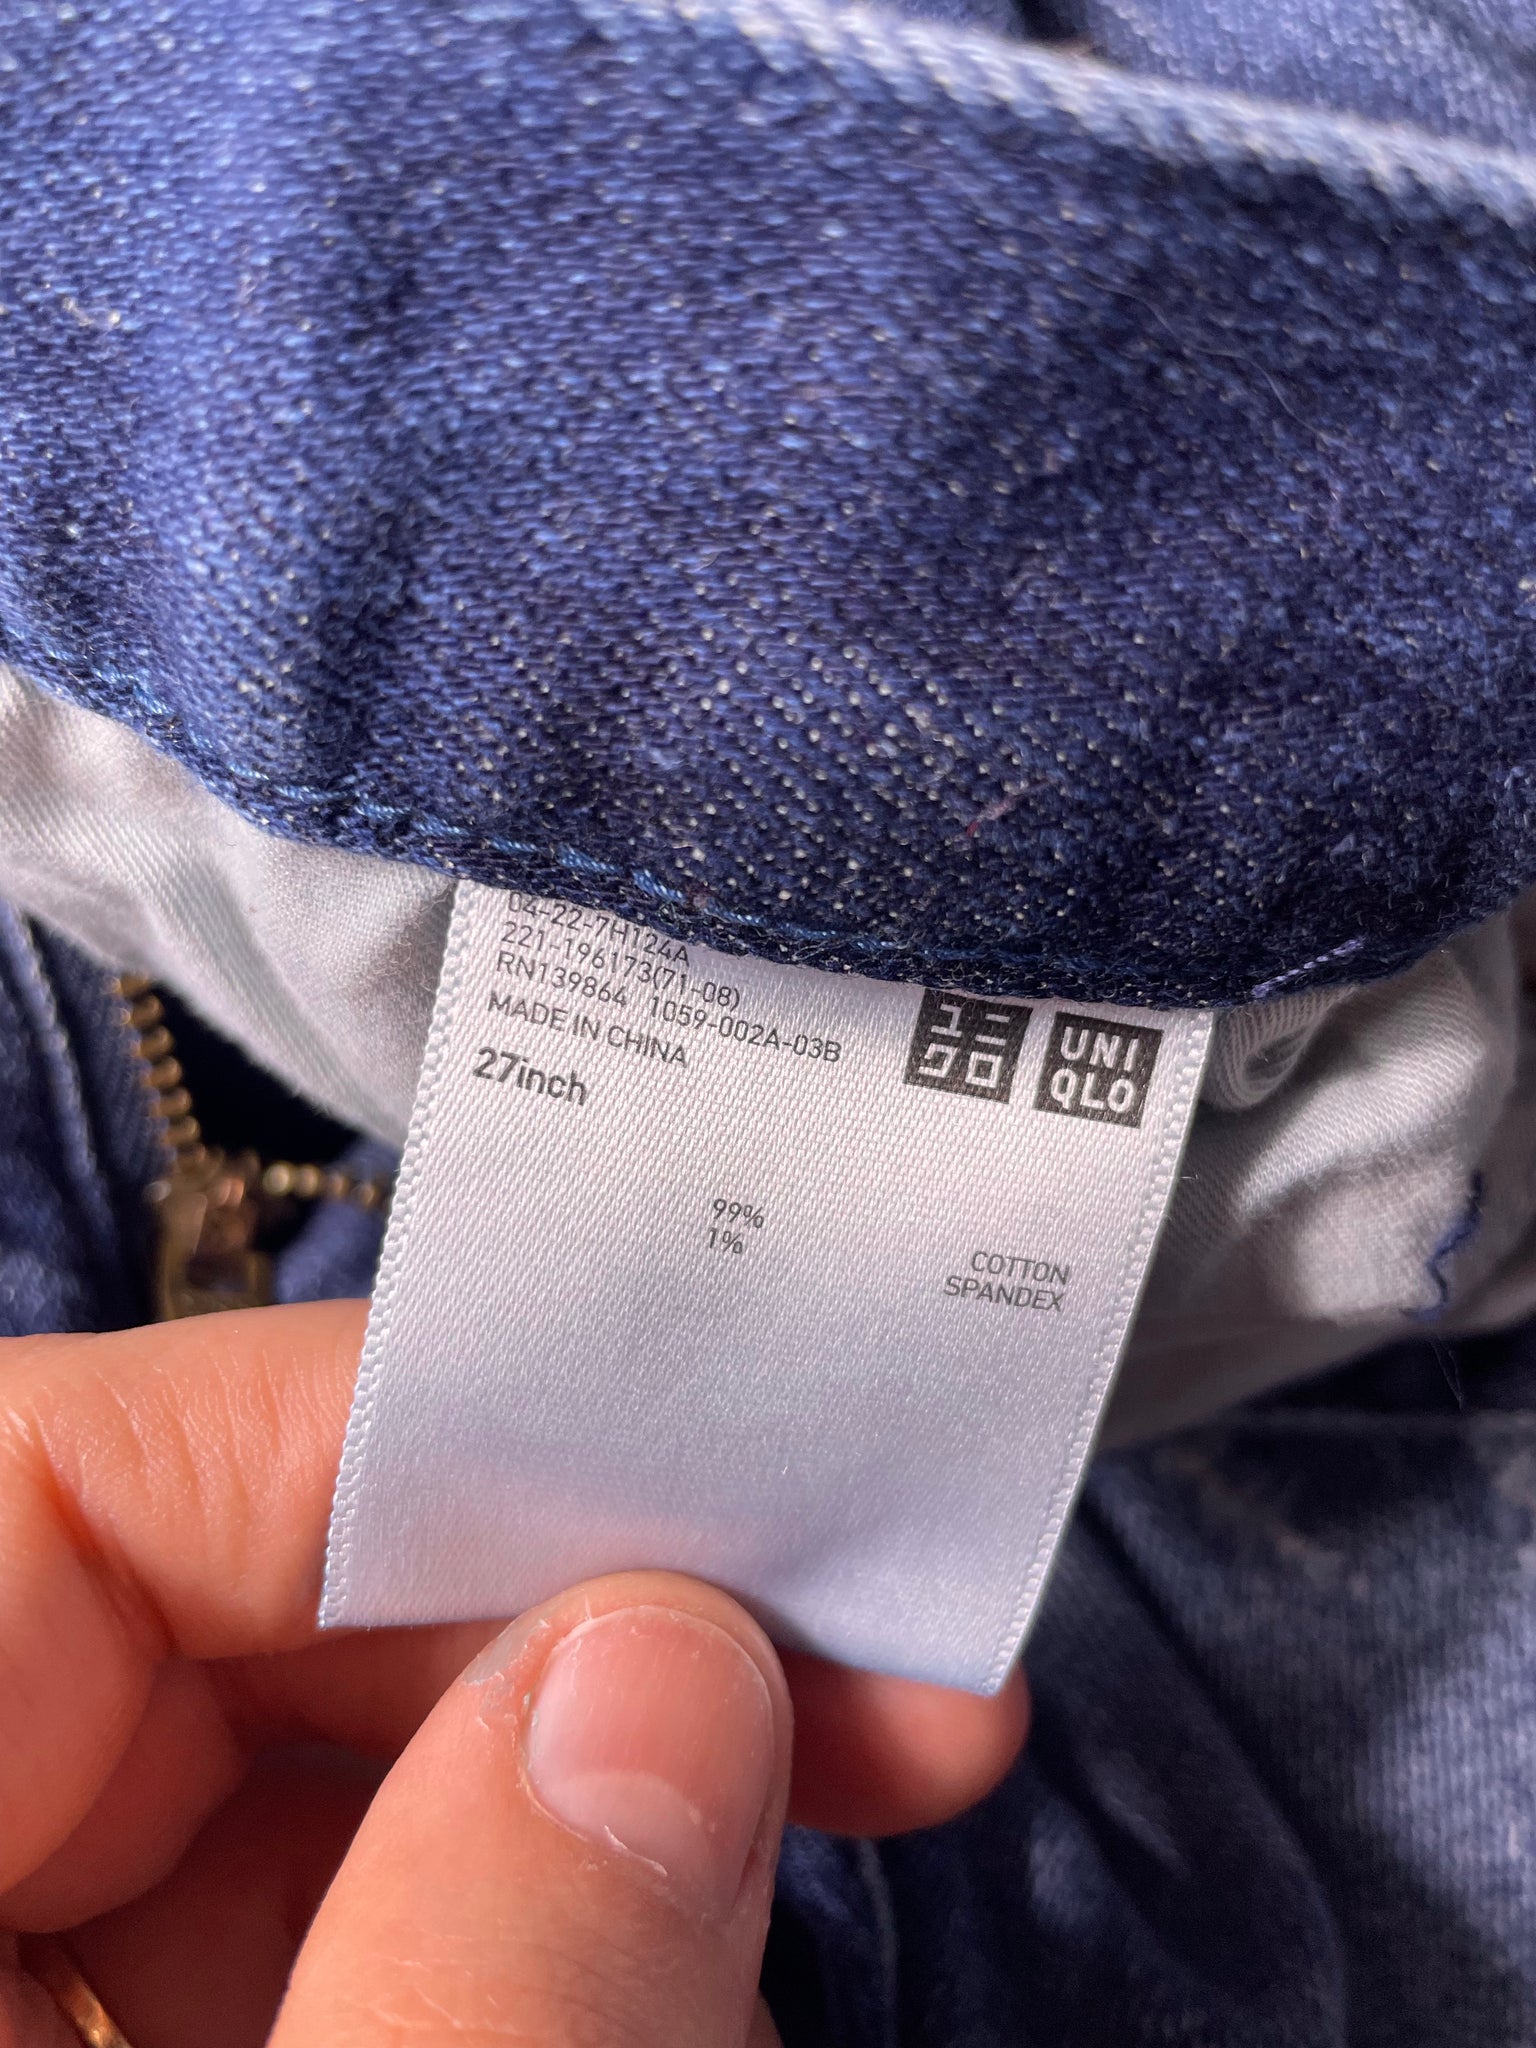 Uniqlo cropped jeans, Size 31